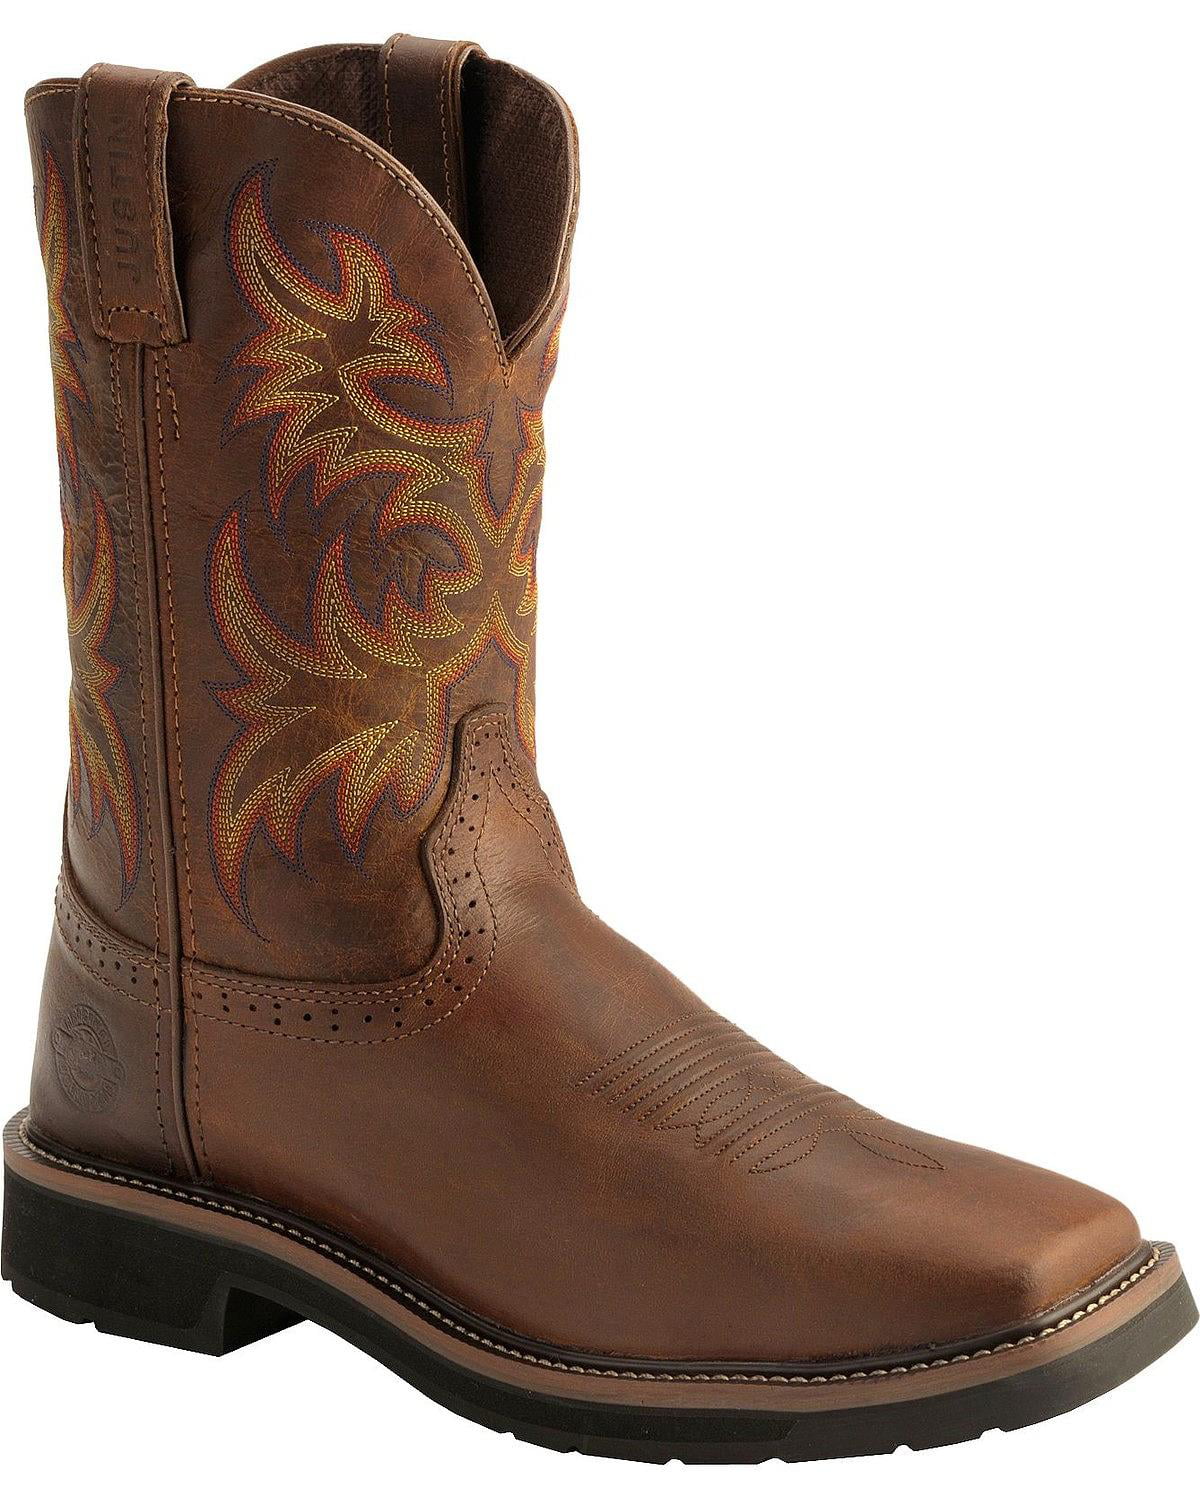 Justin Original Work Boots Men's Stampede Pull-On Square Toe Work Boot 